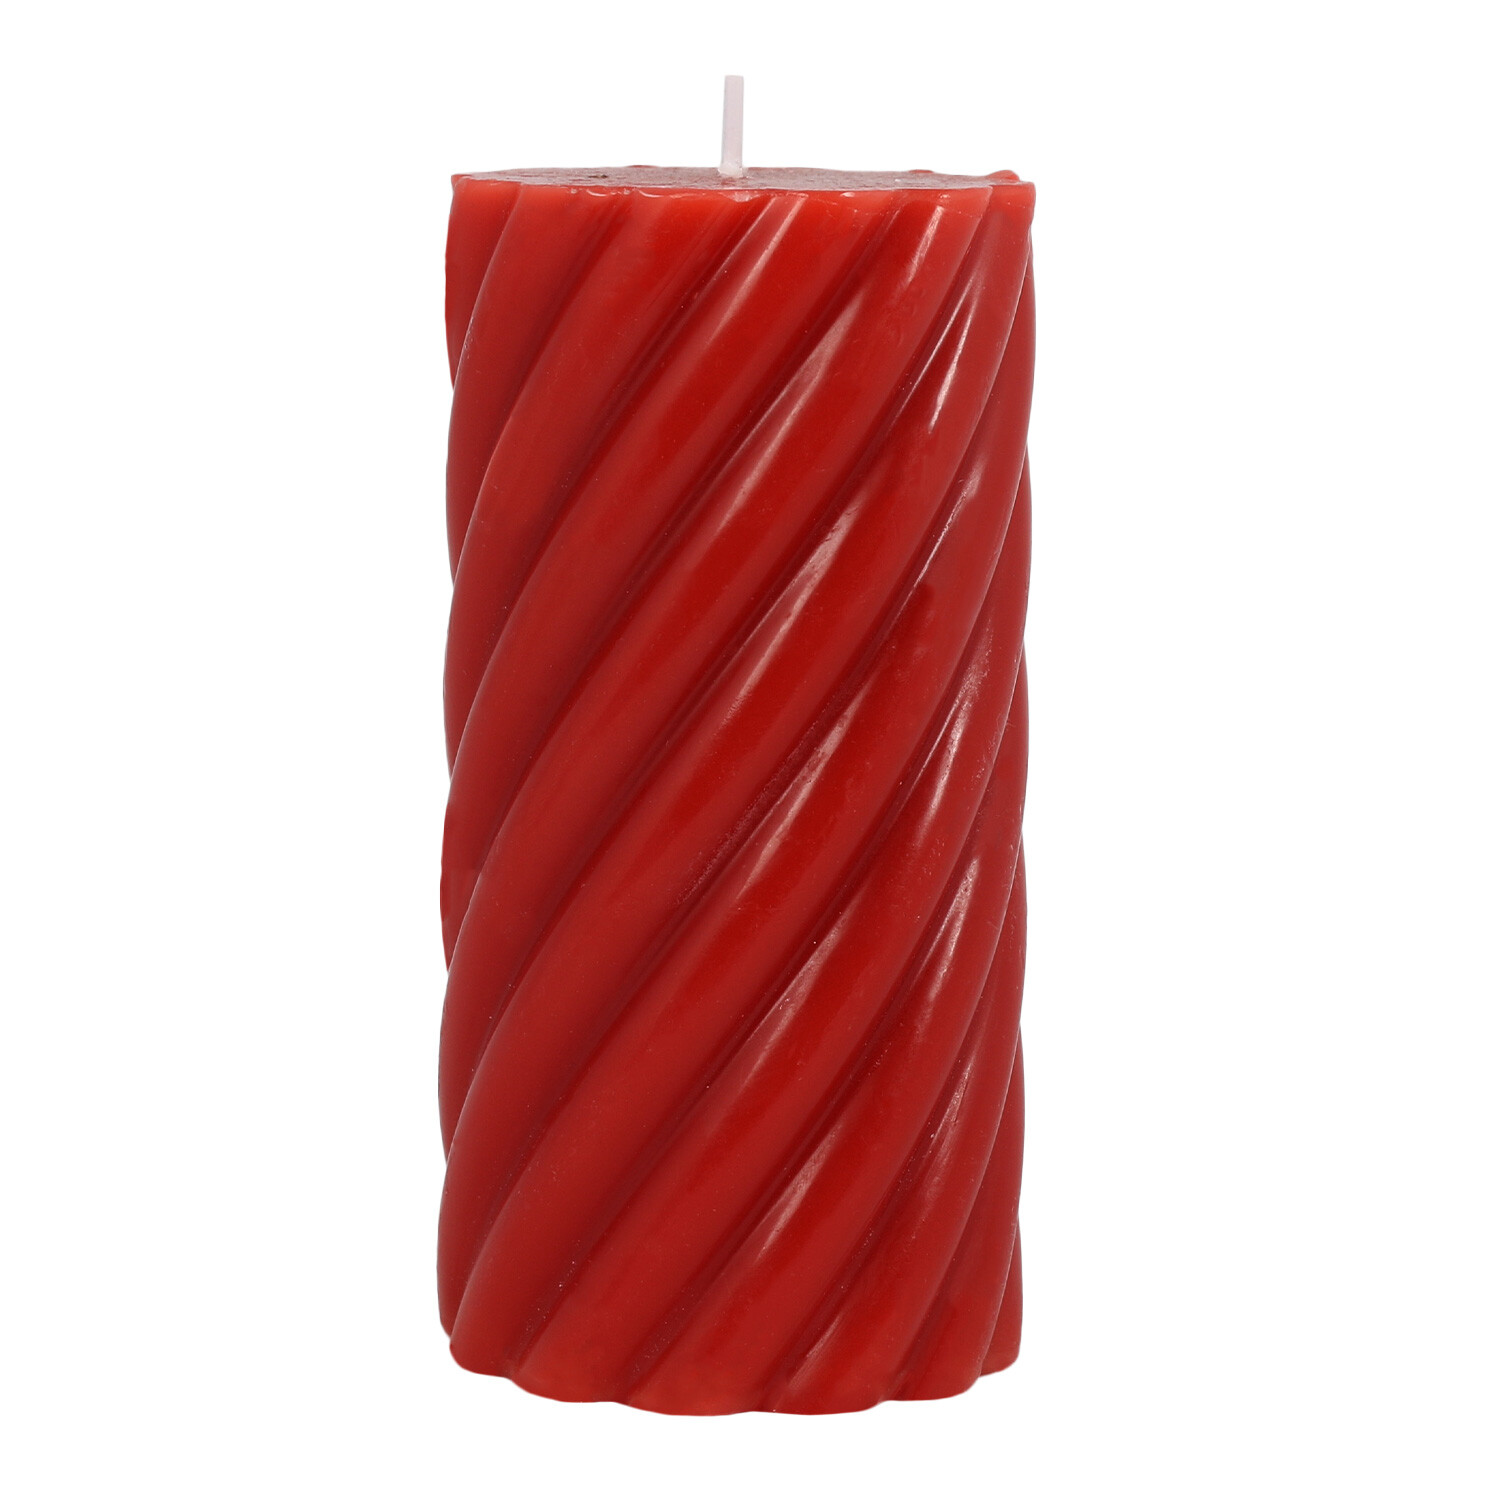 Single Ribbed Pillar Candle in Assorted styles Image 1